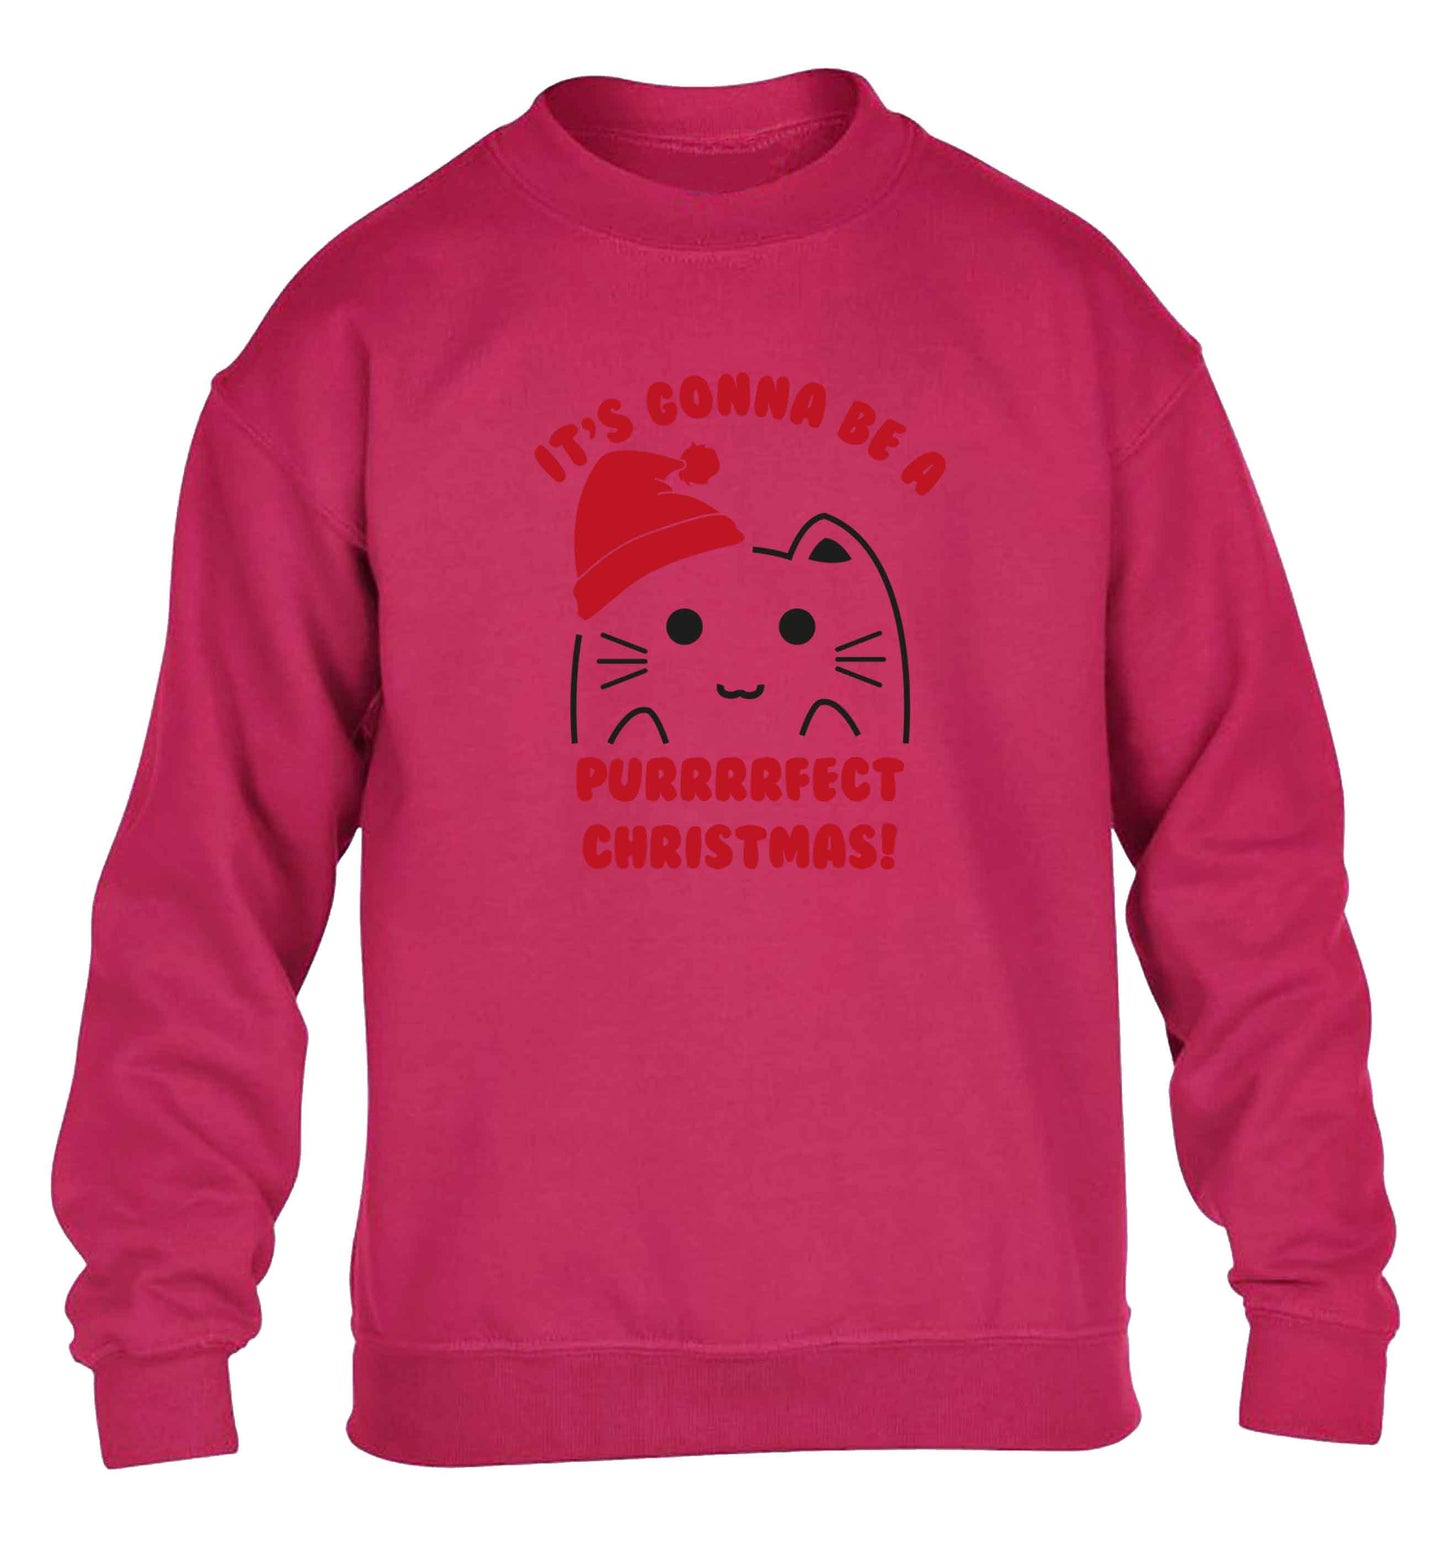 It's going to be a purrfect Christmas children's pink sweater 12-13 Years